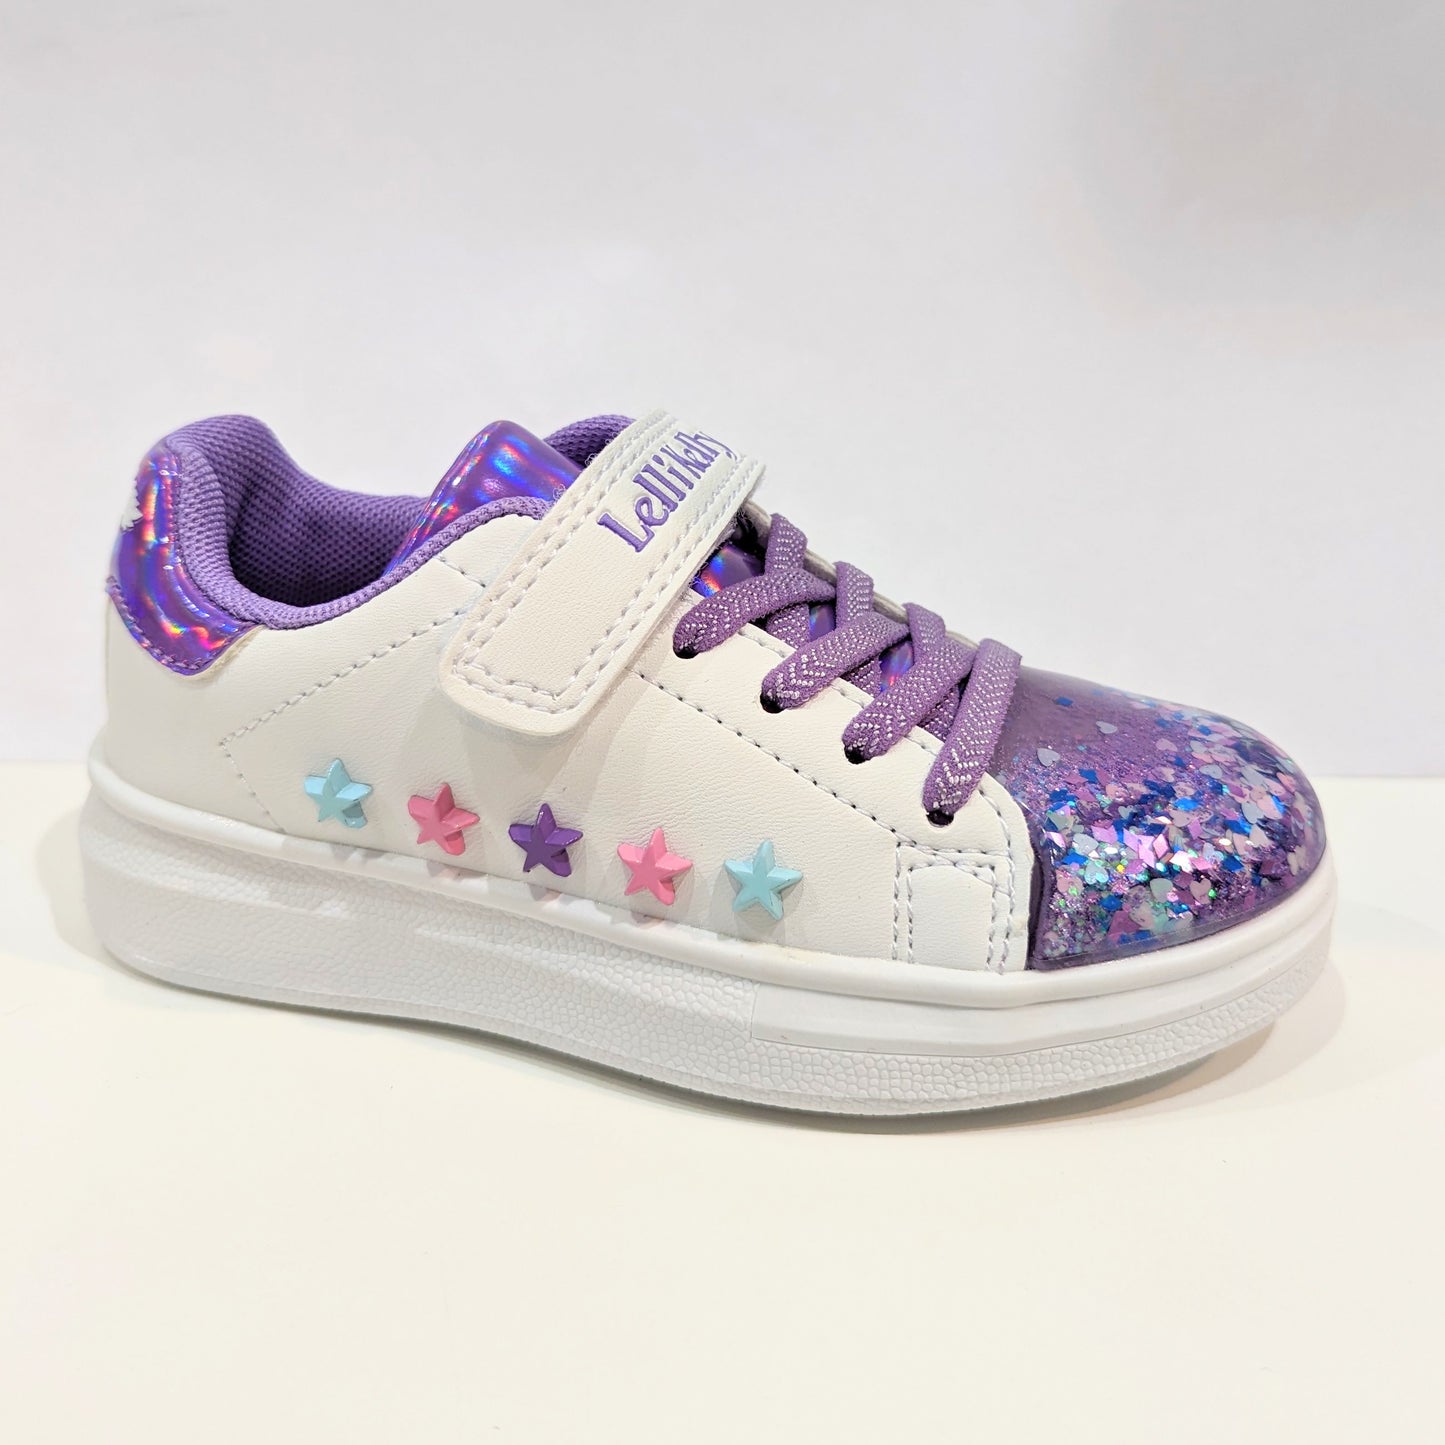 A girls casual trainer by Lelli Kelly, style Helene, in white and lilac leather with faux lace and velcro fastening. Right side view.